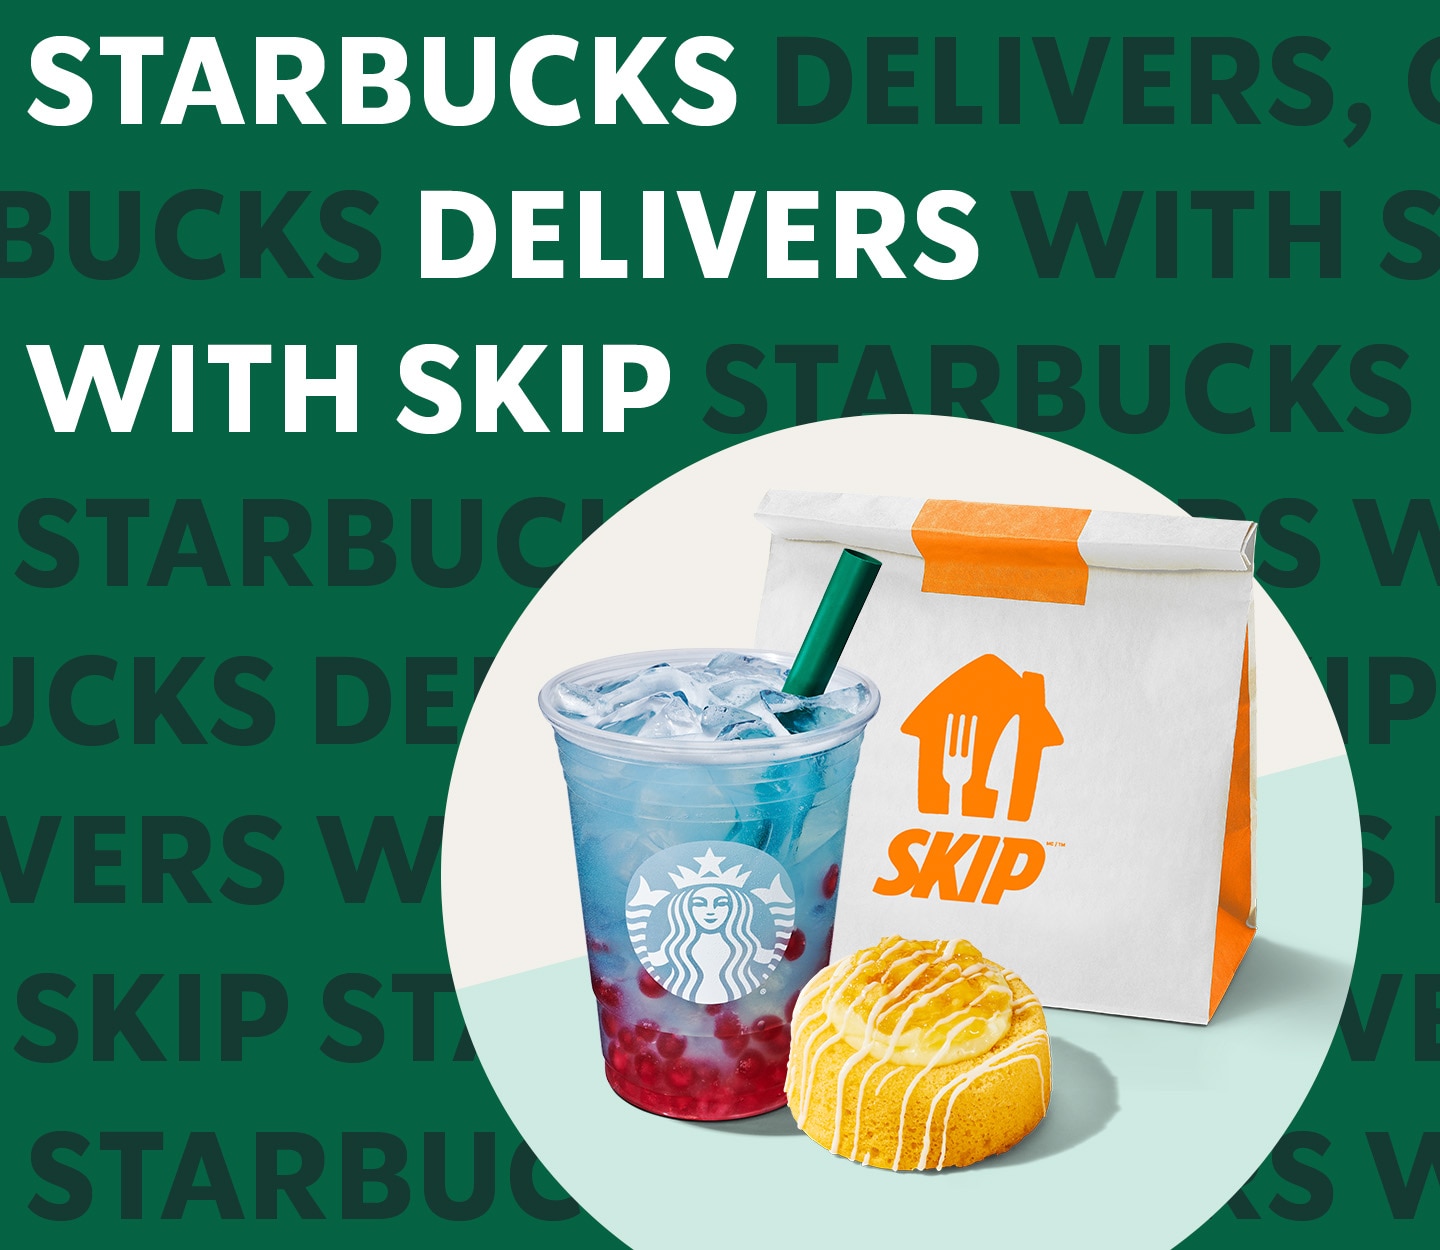 Starbucks Delivers with Skip | Starbucks products with Skip takeout bag